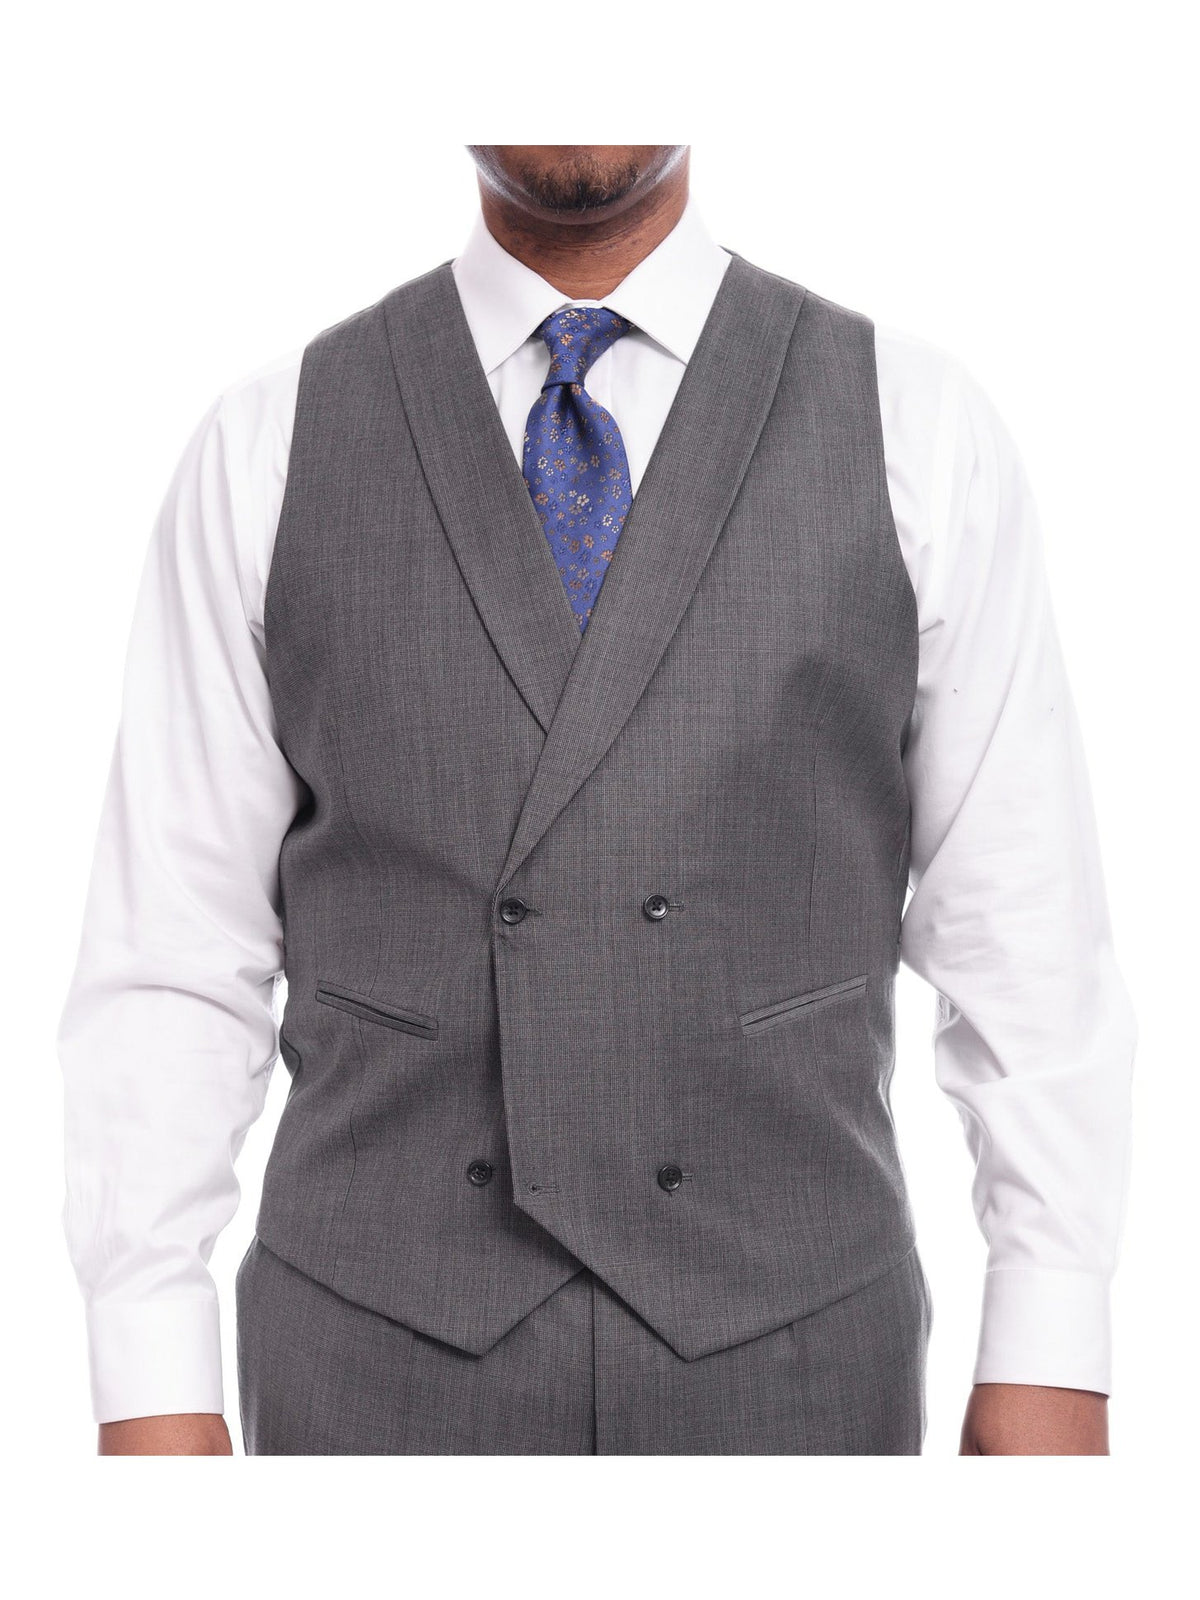 Steven Land Classic Fit Textured Gray Vested Pleated Wool Suit - The Suit Depot